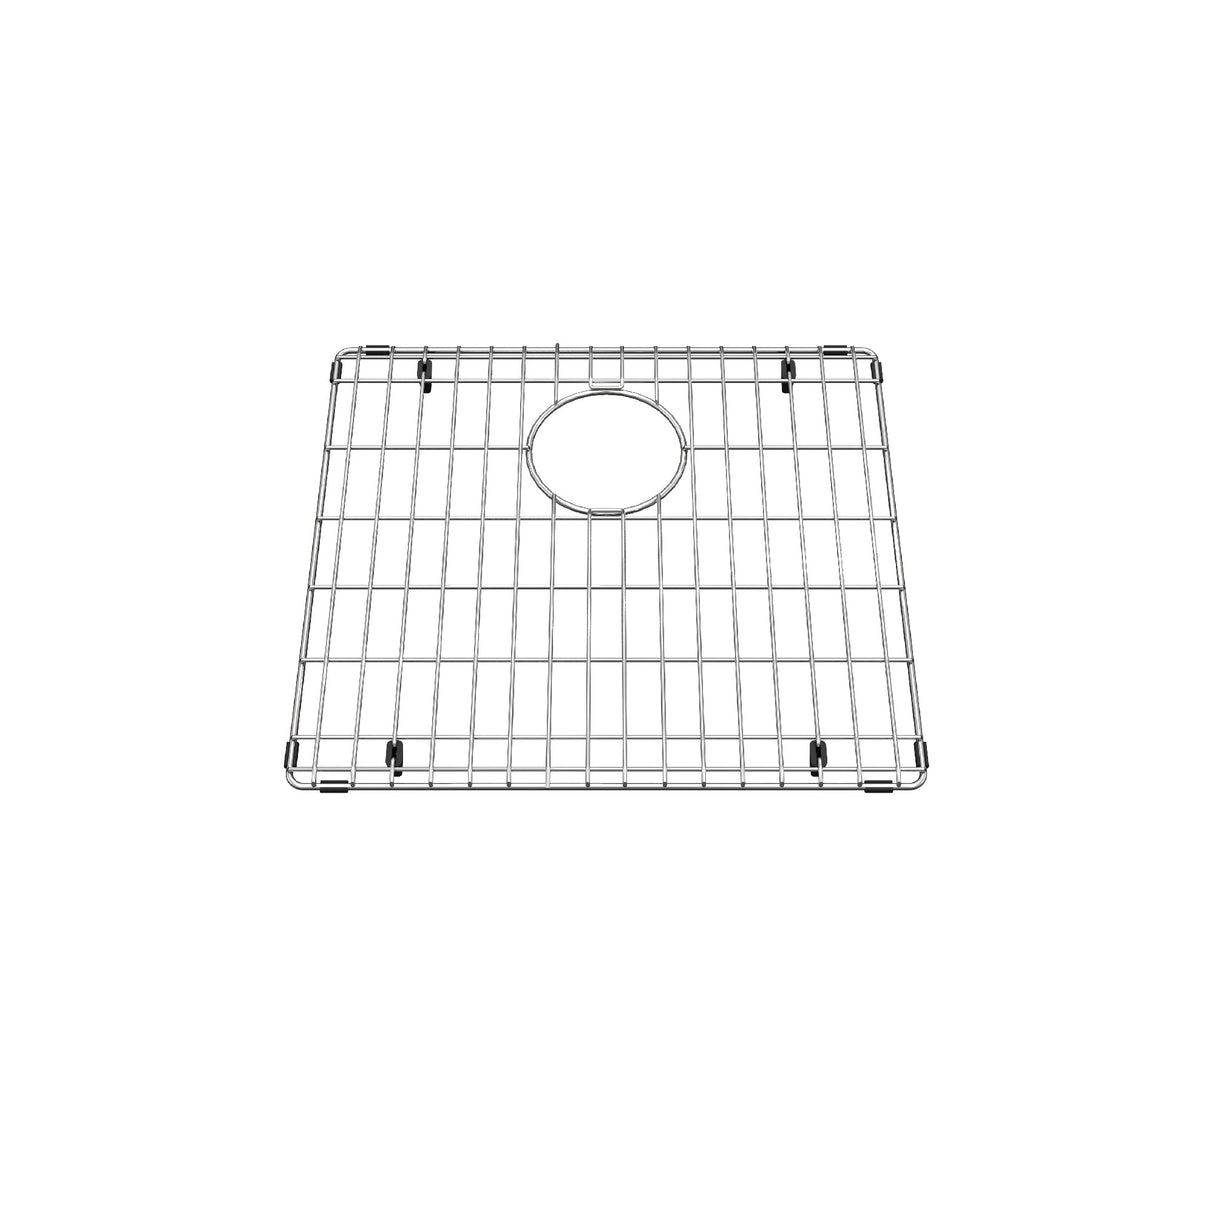 KINDRED BG518S Stainless Steel Bottom Grid for Sink 15-in x 16.5-in In Stainless Steel